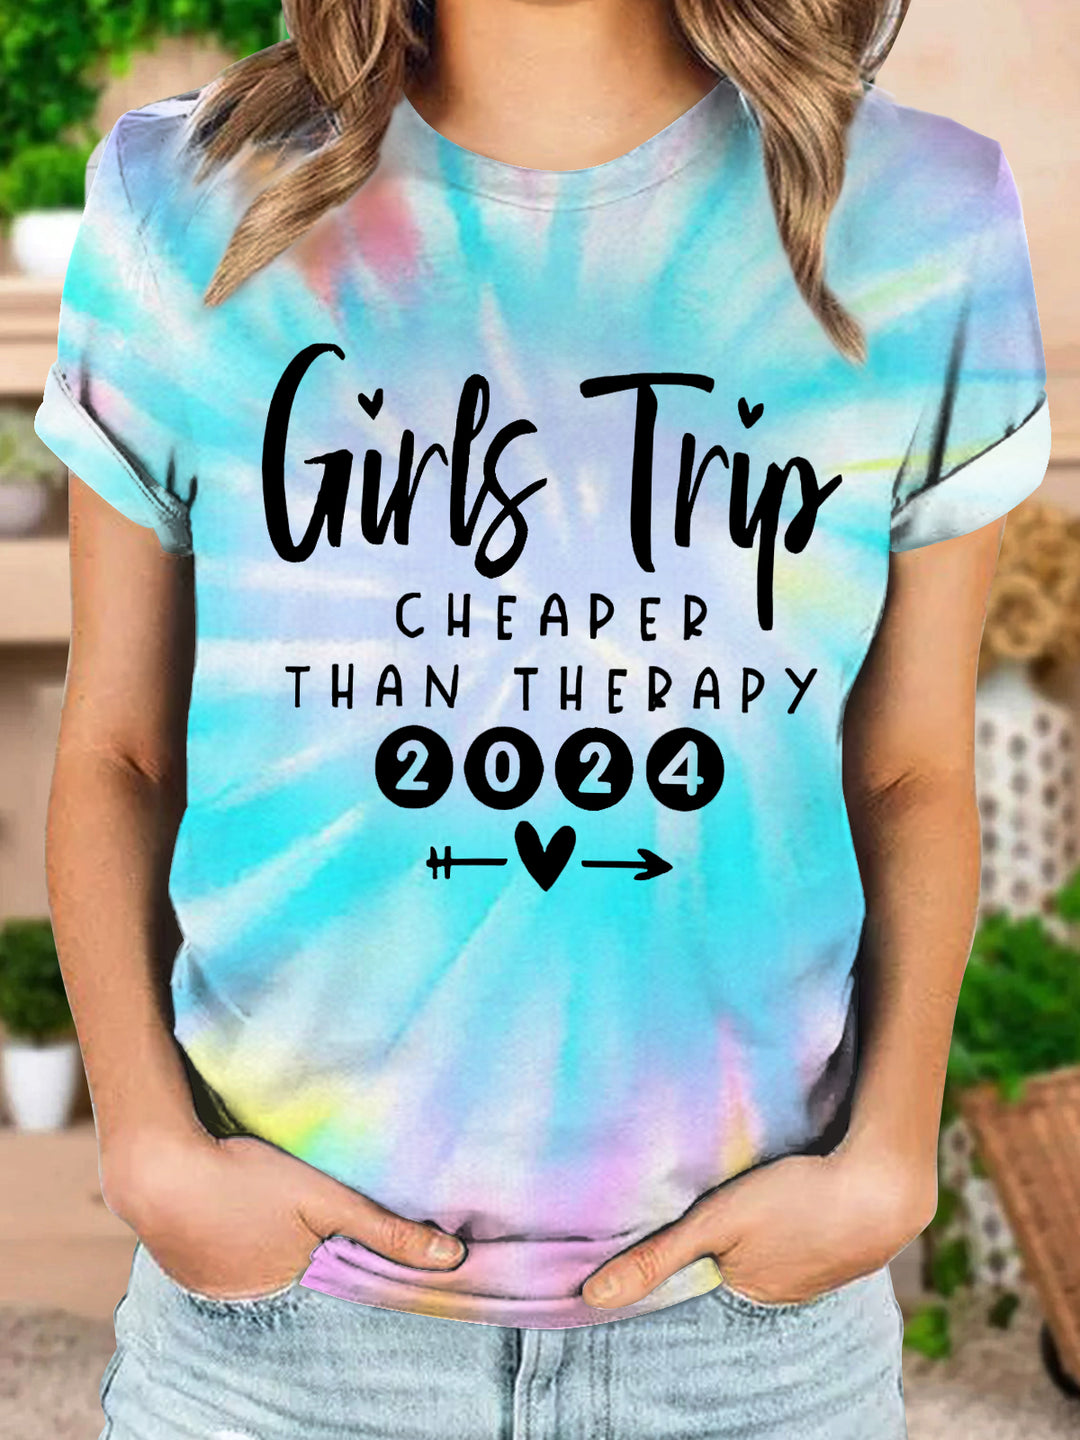 Girls Trip 2024 Cheaper Than Therapy Printed Crew Neck T-shirt